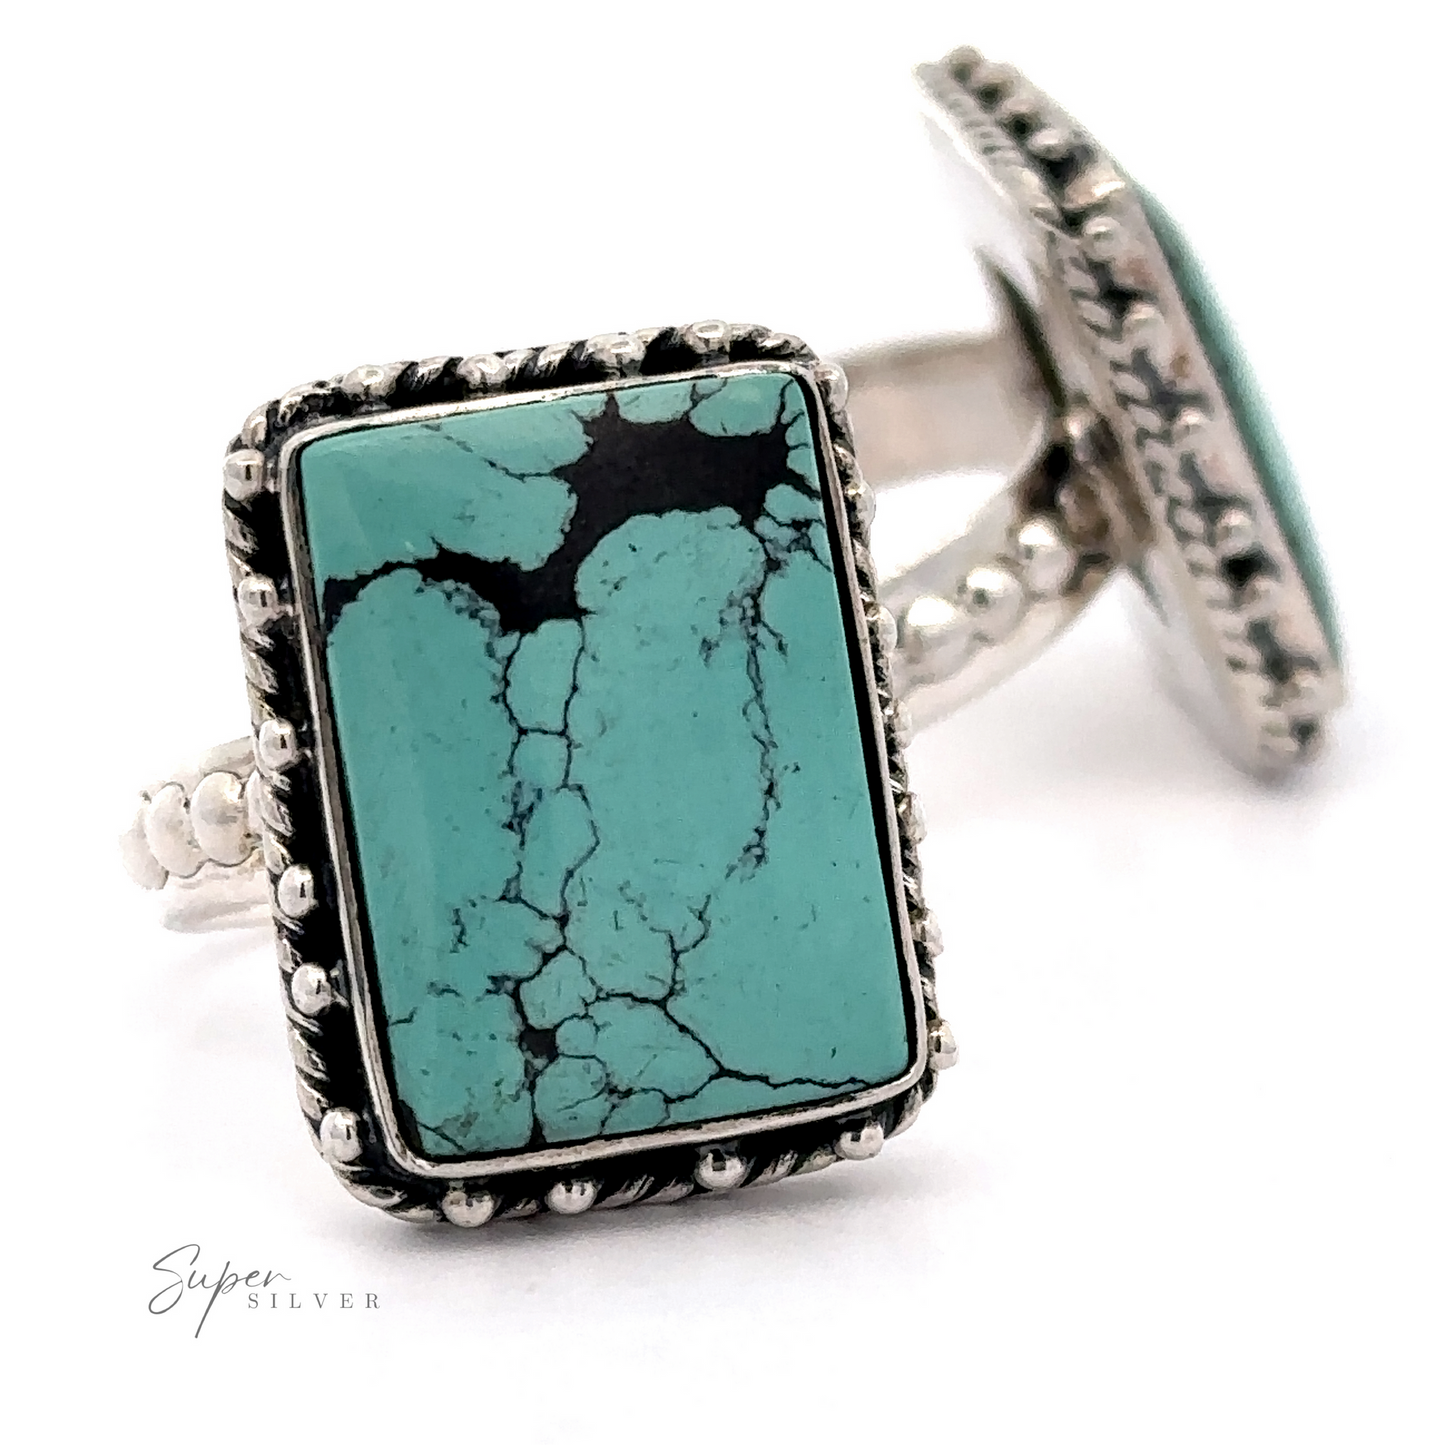 Close-up of two Rectangular Shape Natural Turquoise Ring With Ball Border rings with sterling silver bands and ornate detailing, displaying distinct black vein patterns. "Super Silver" text is visible. Rings are positioned upright on a white background.